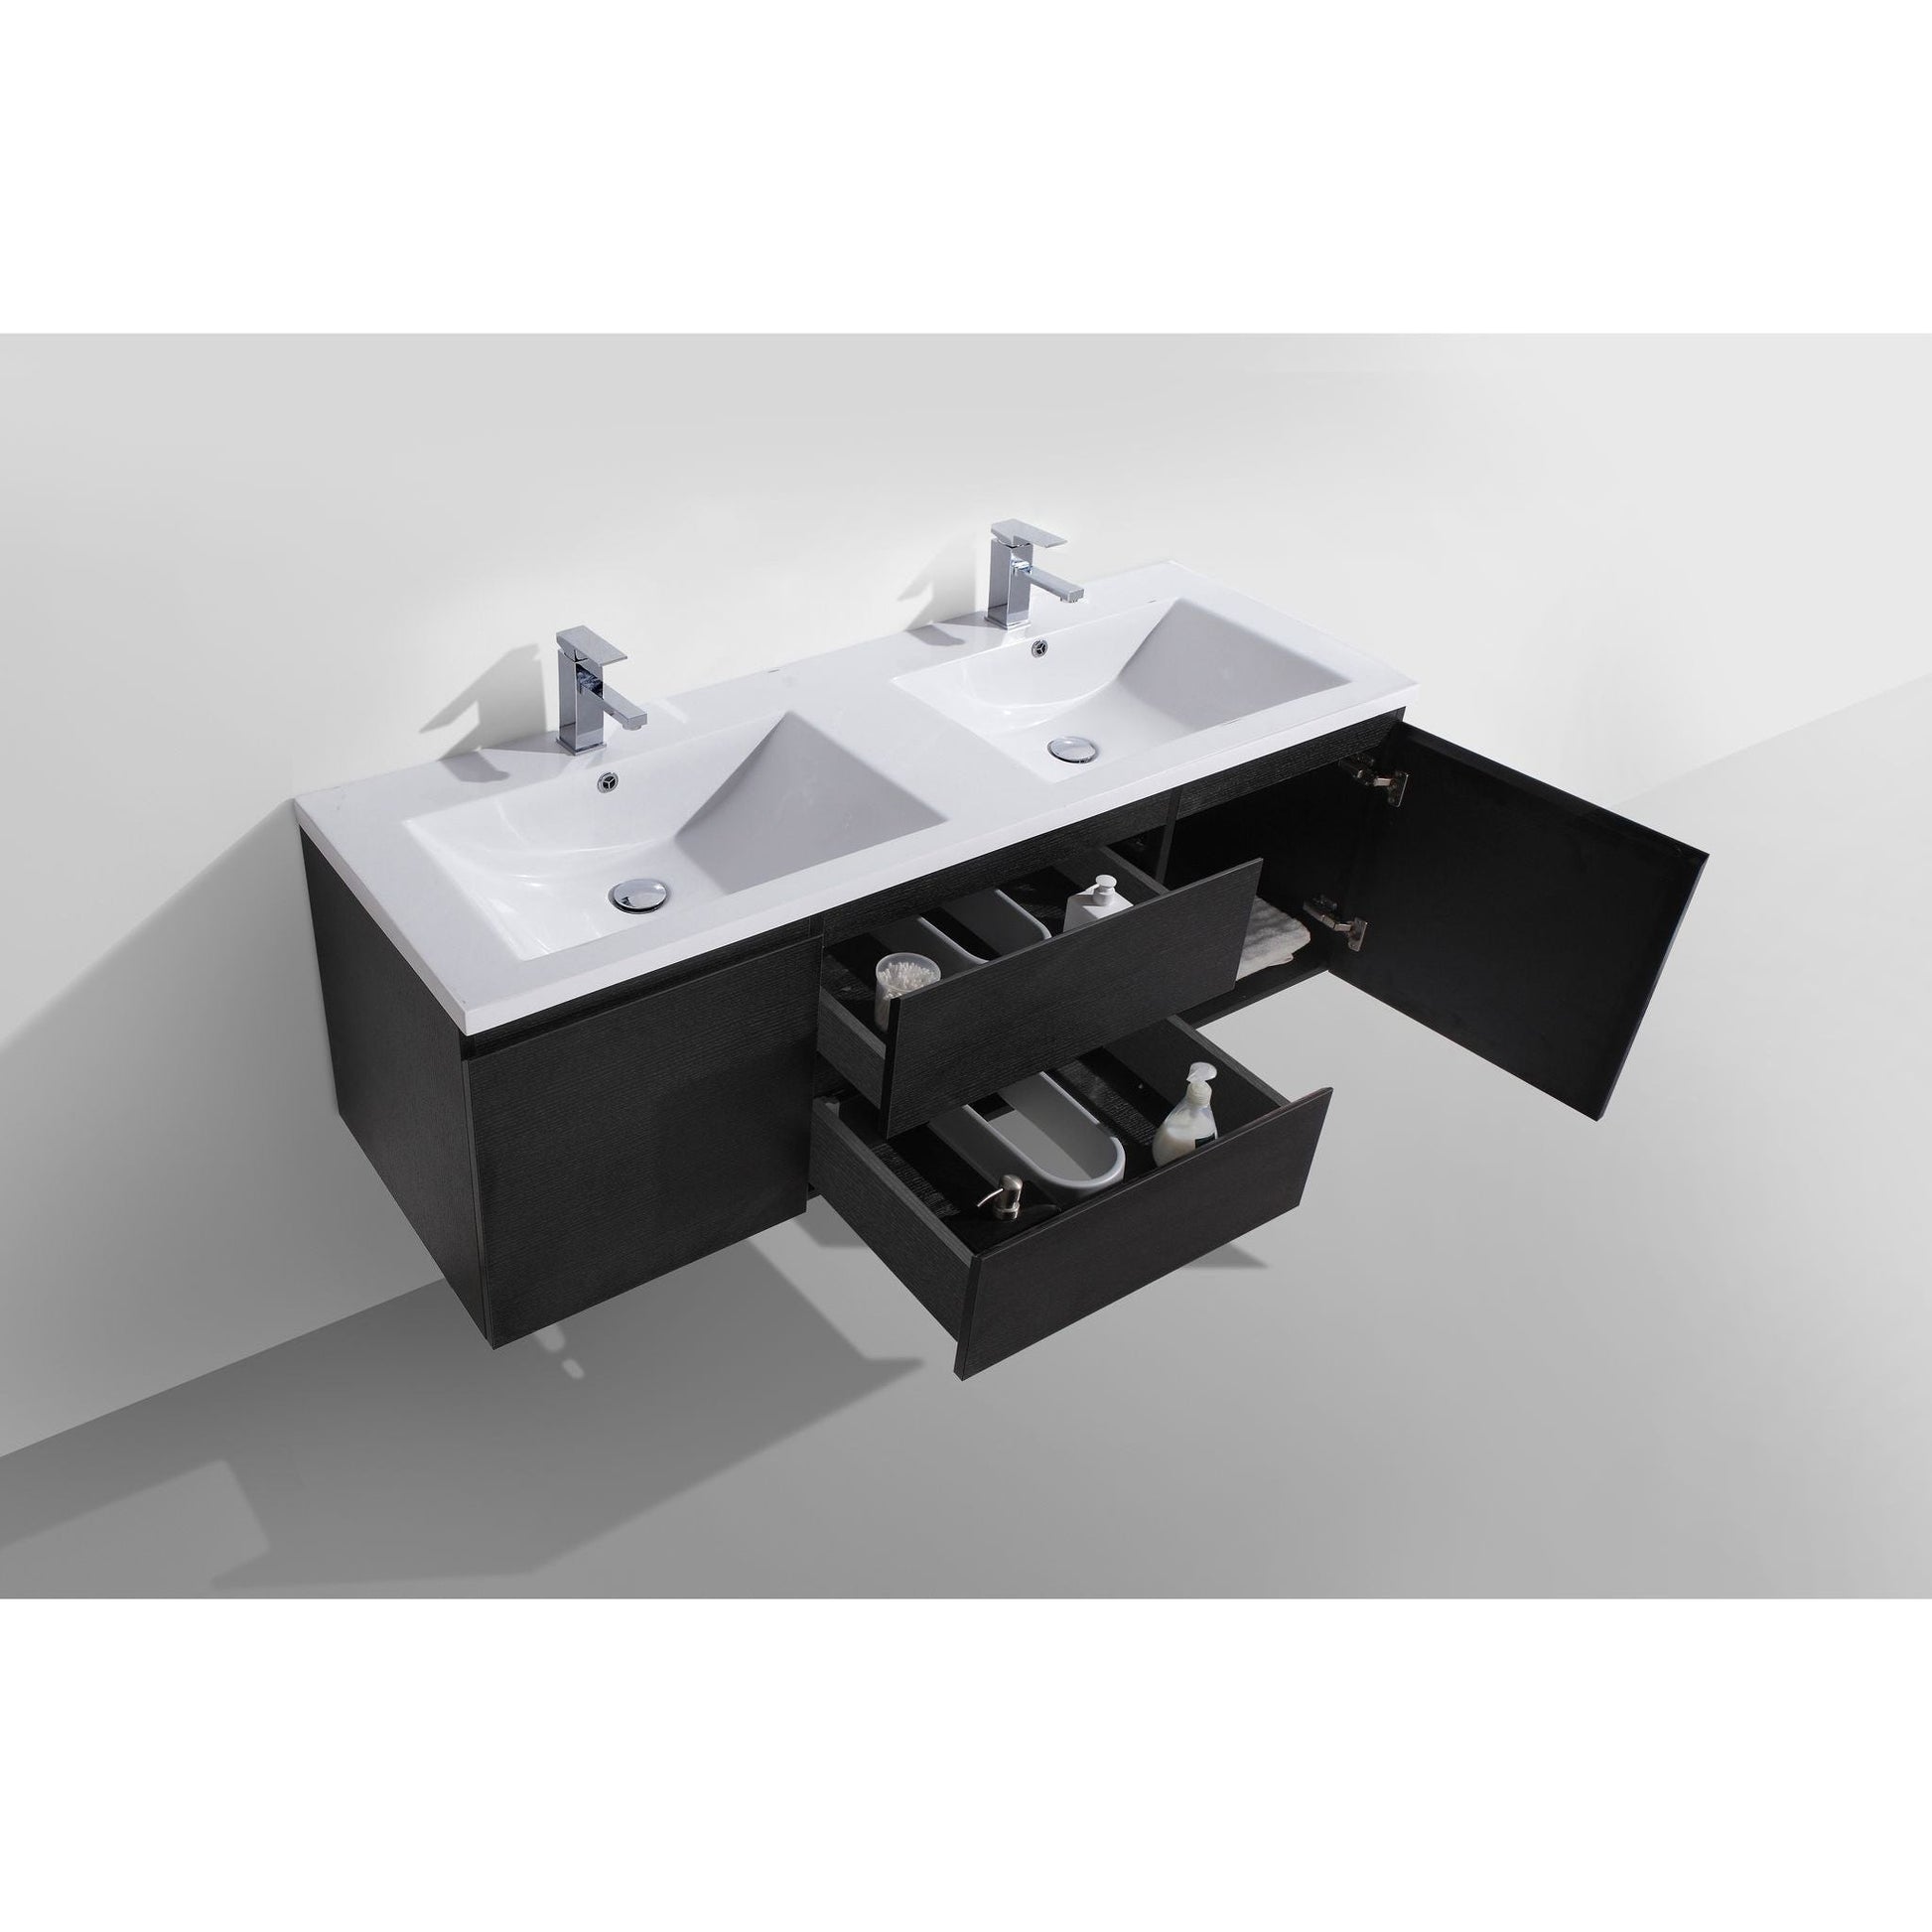 Moreno Bath Bohemia Lina 60" Rich Black Wall-Mounted Vanity With Double Reinforced White Acrylic Sinks